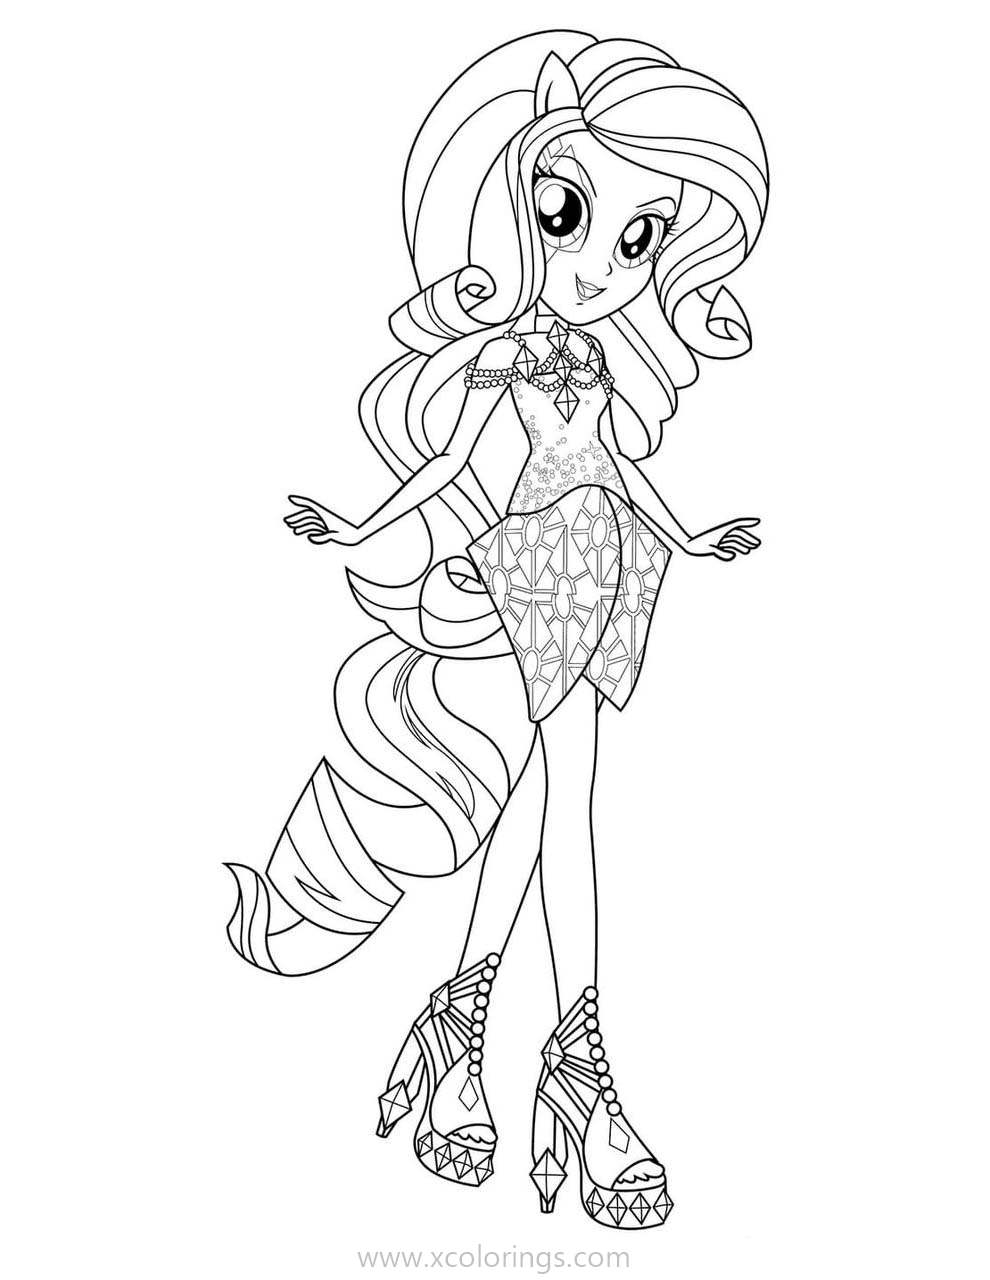 Free Equestria Girls Coloring Pages Rarity with Beautiful Clothes printable